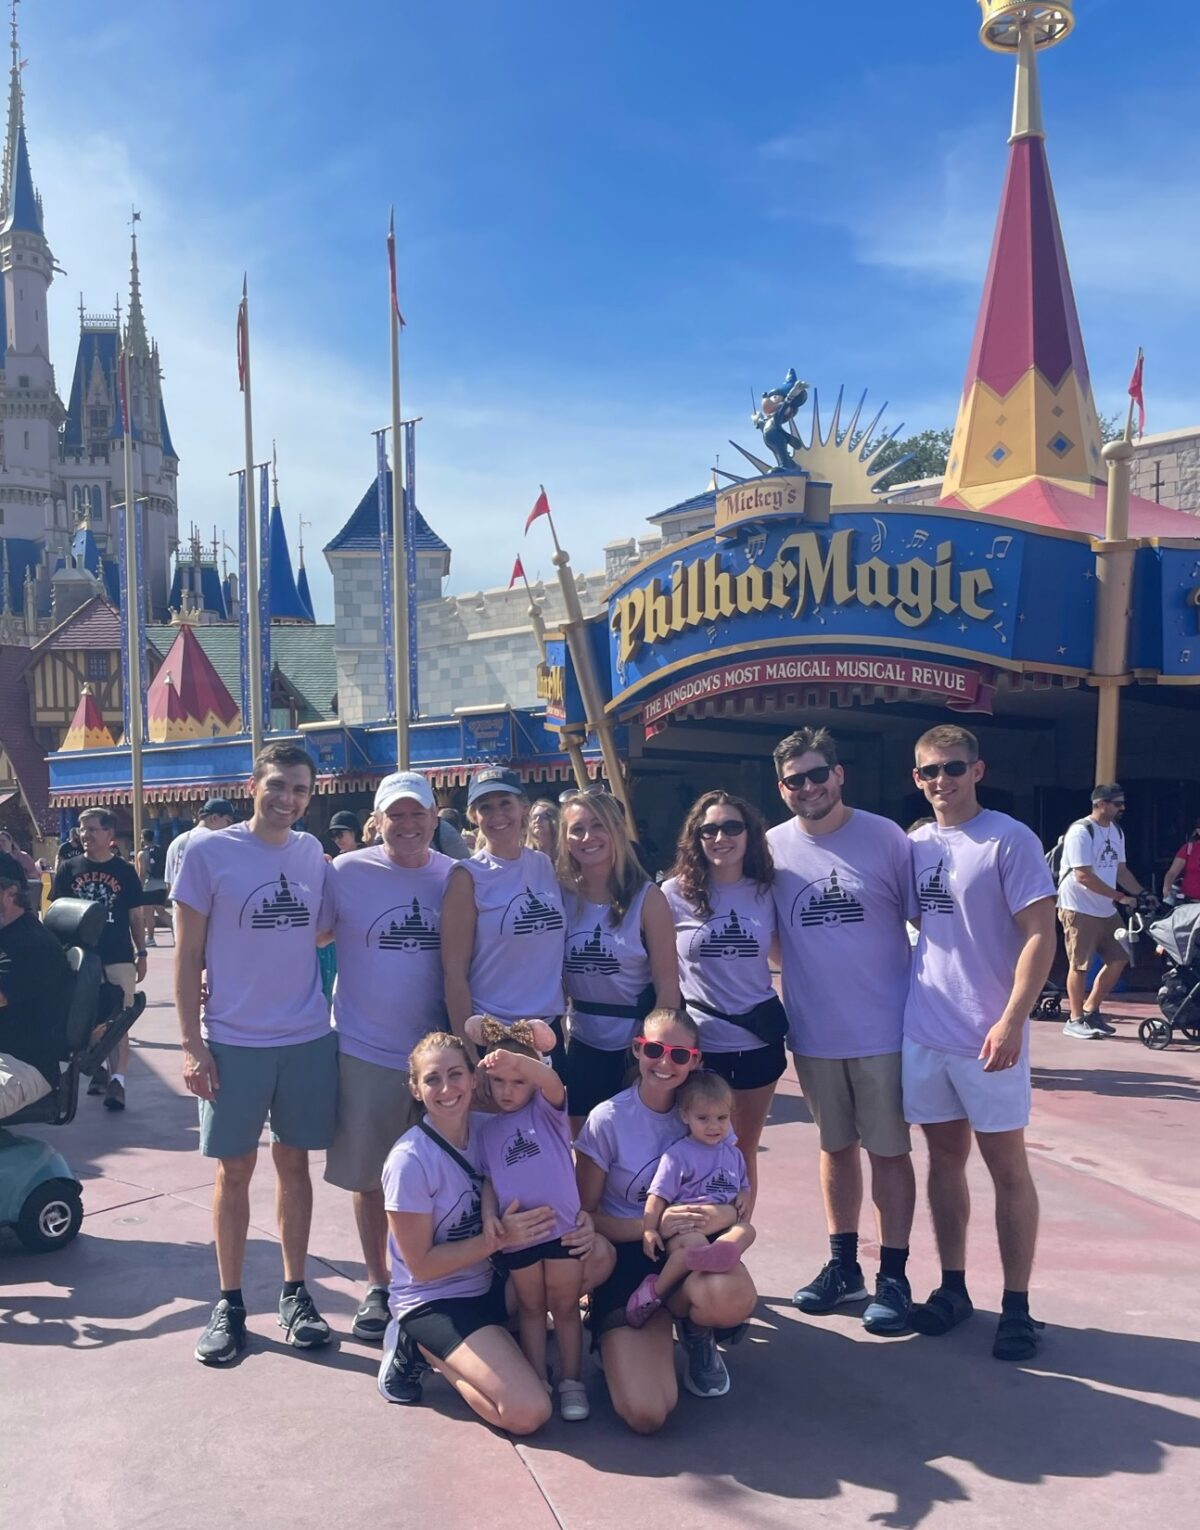 Family of 11 standing for photo at Disney World all in matching purple shirts.